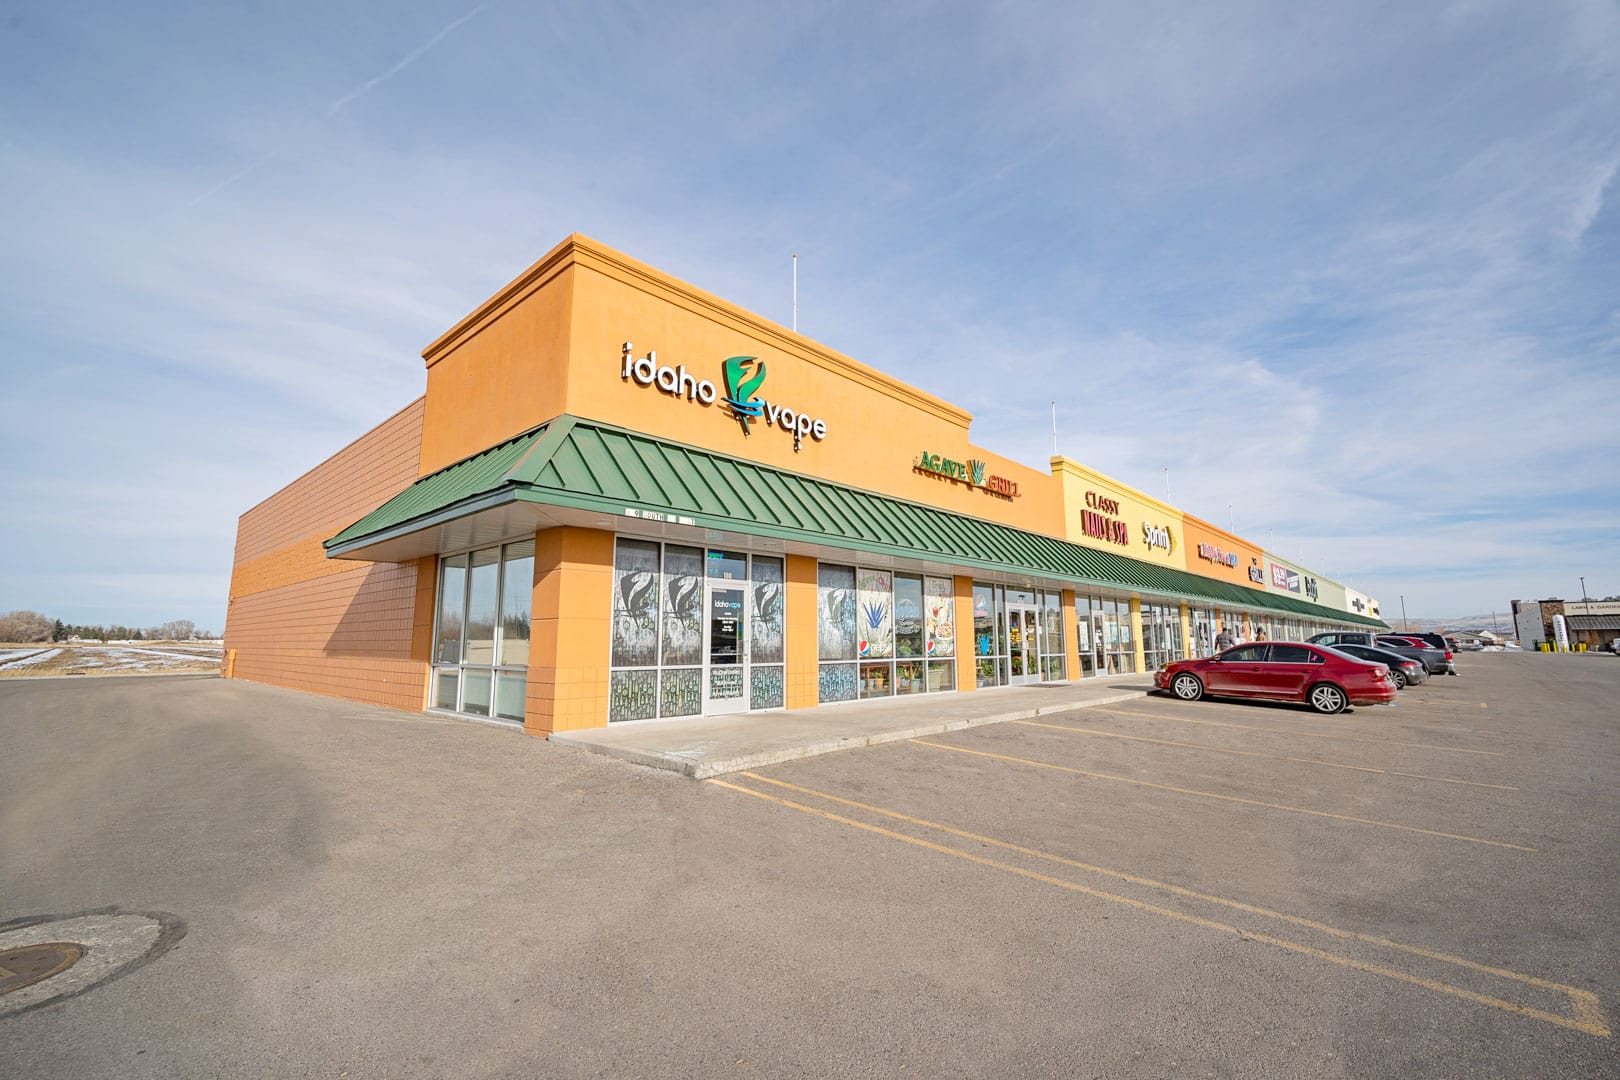 Sandcreek Plaza is a Multi-tenant Retail Center at 939 S. 25th East in Ammon, Idaho